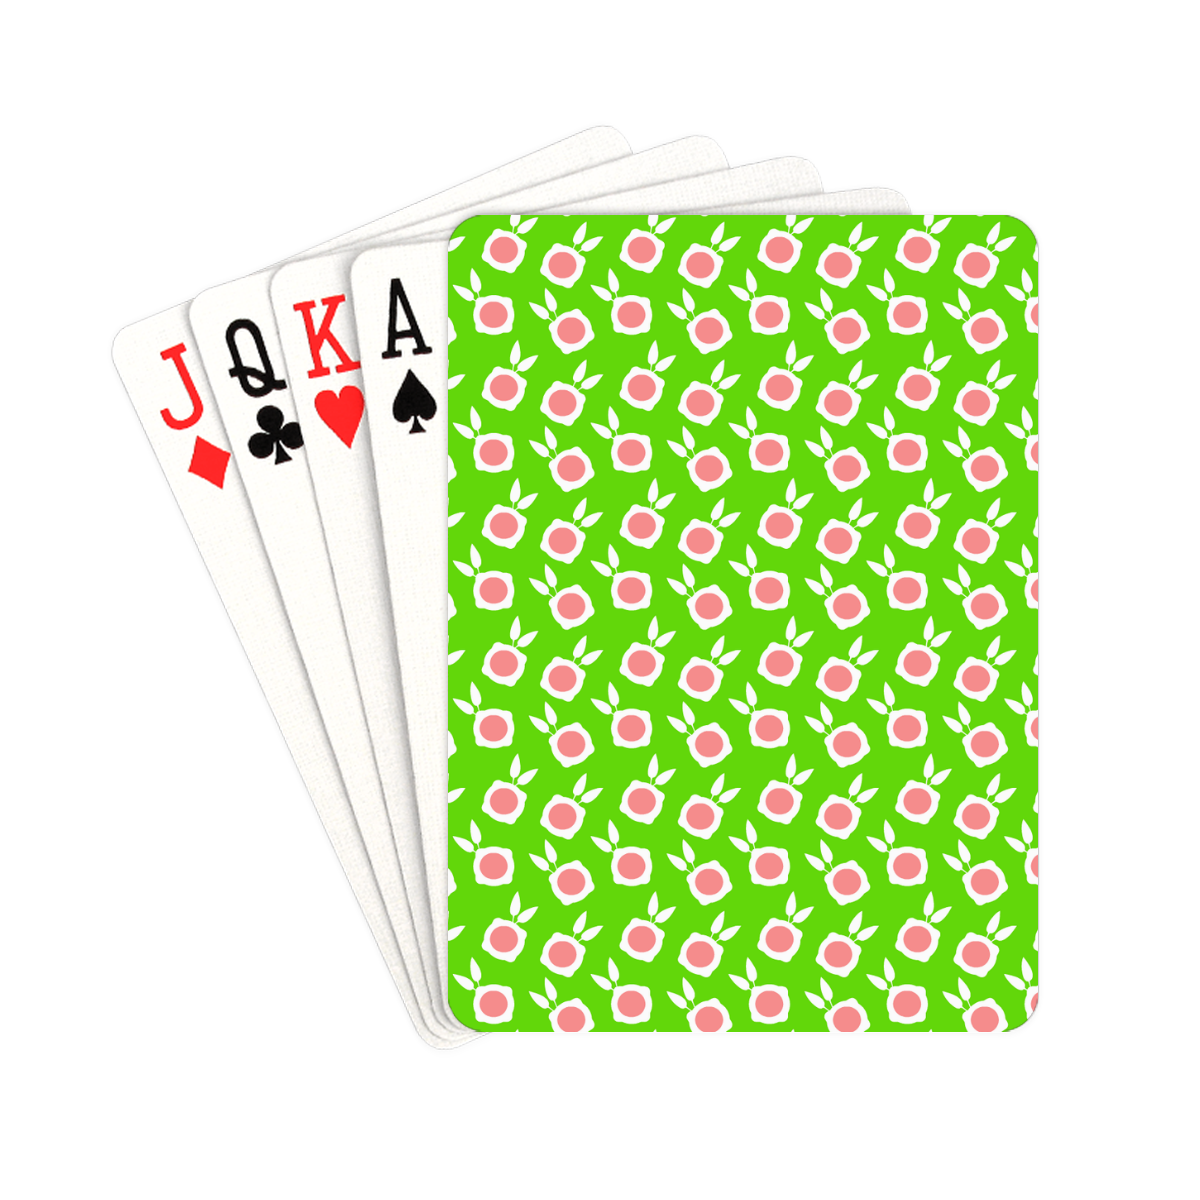 square flowers green Playing Cards 2.5"x3.5"